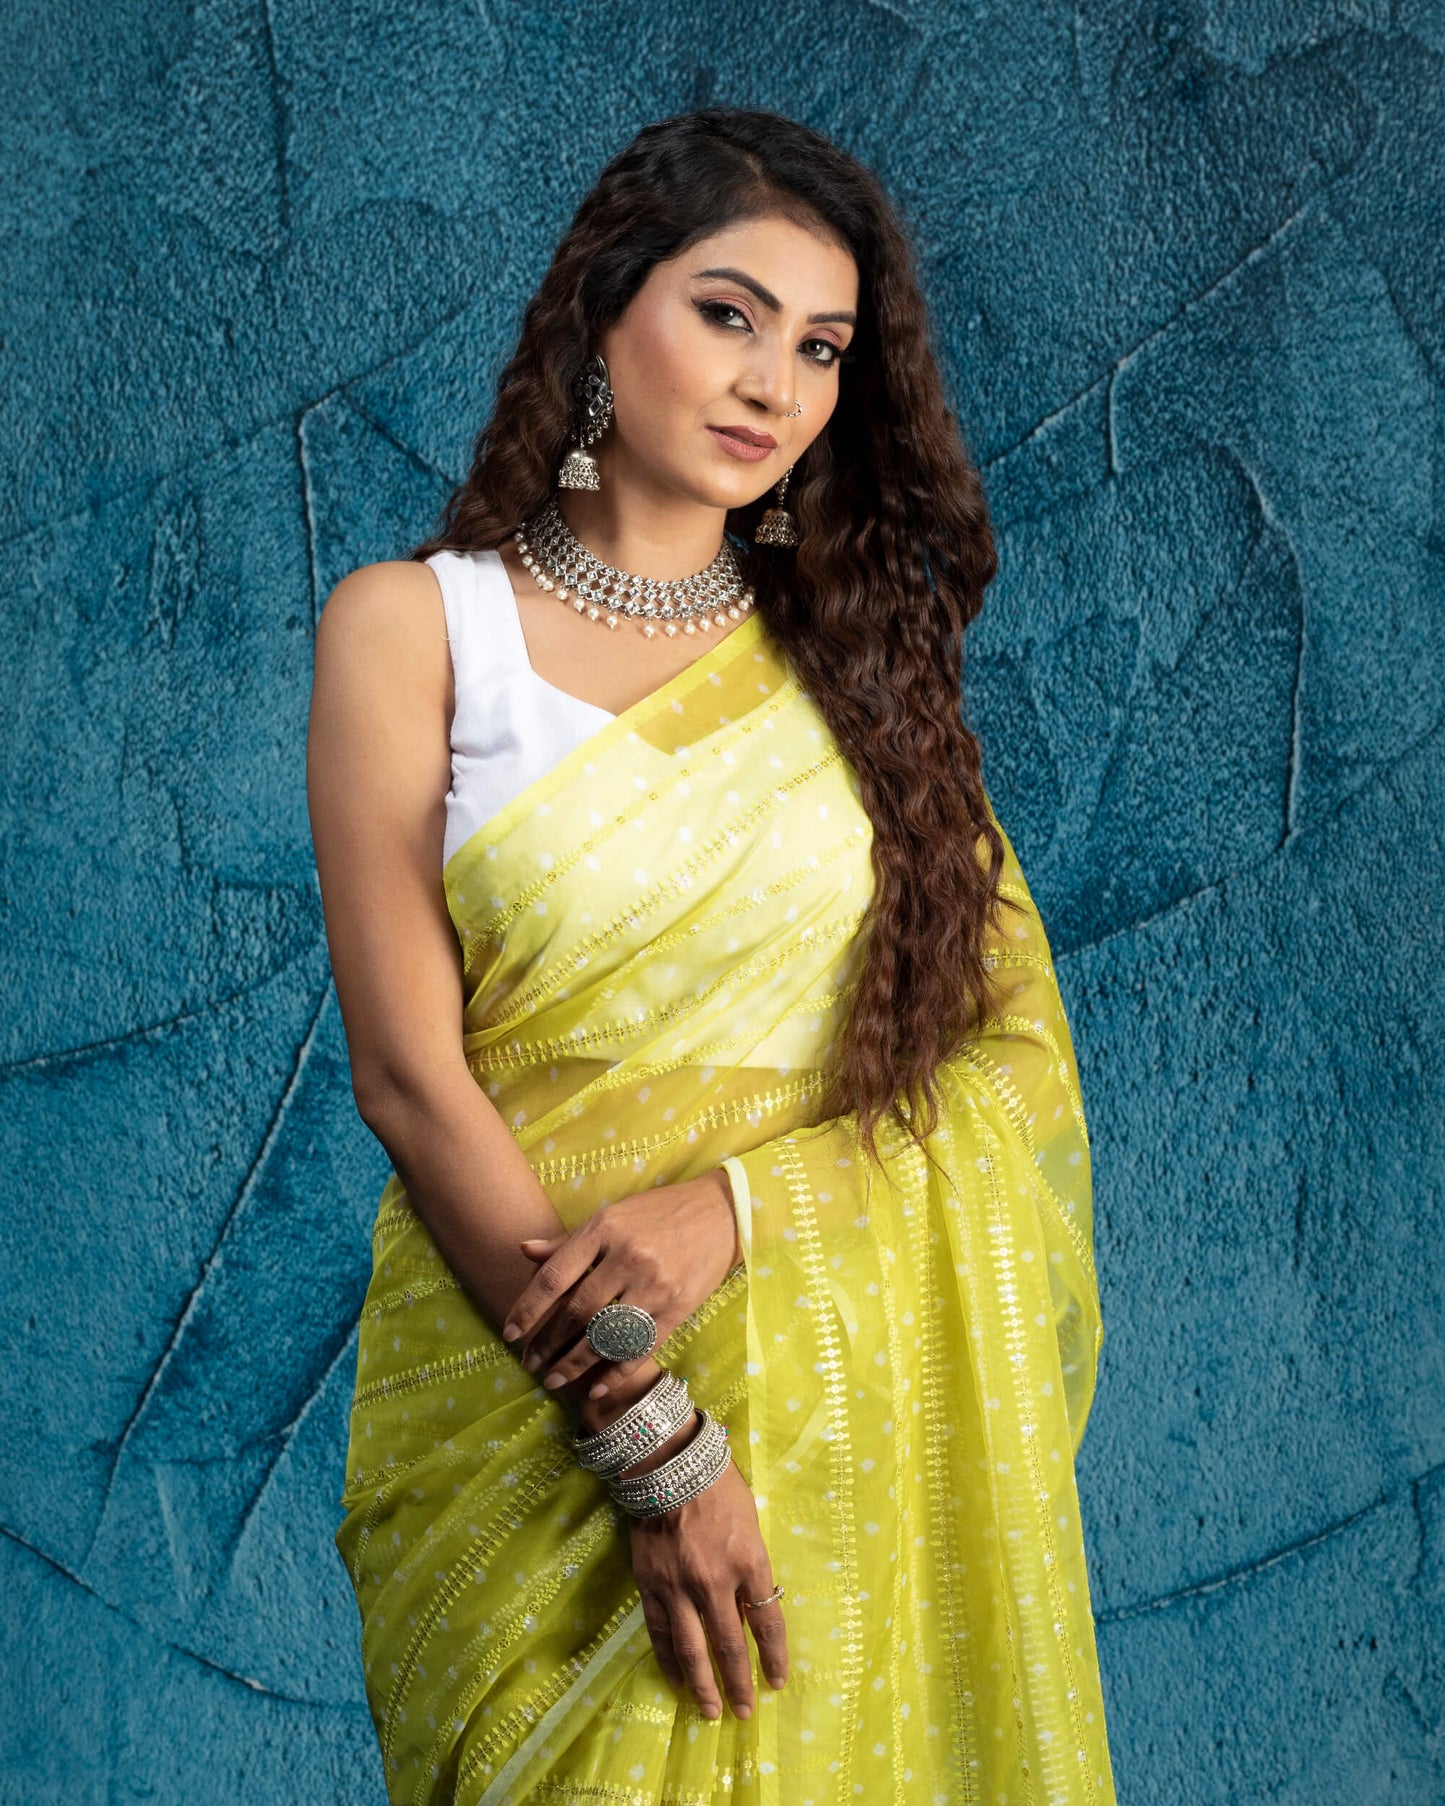 Pineapple Yellow And White Bandhani Pattern Stripes Zari Sequins Embroidery Digital Print Organza Saree With Tassles